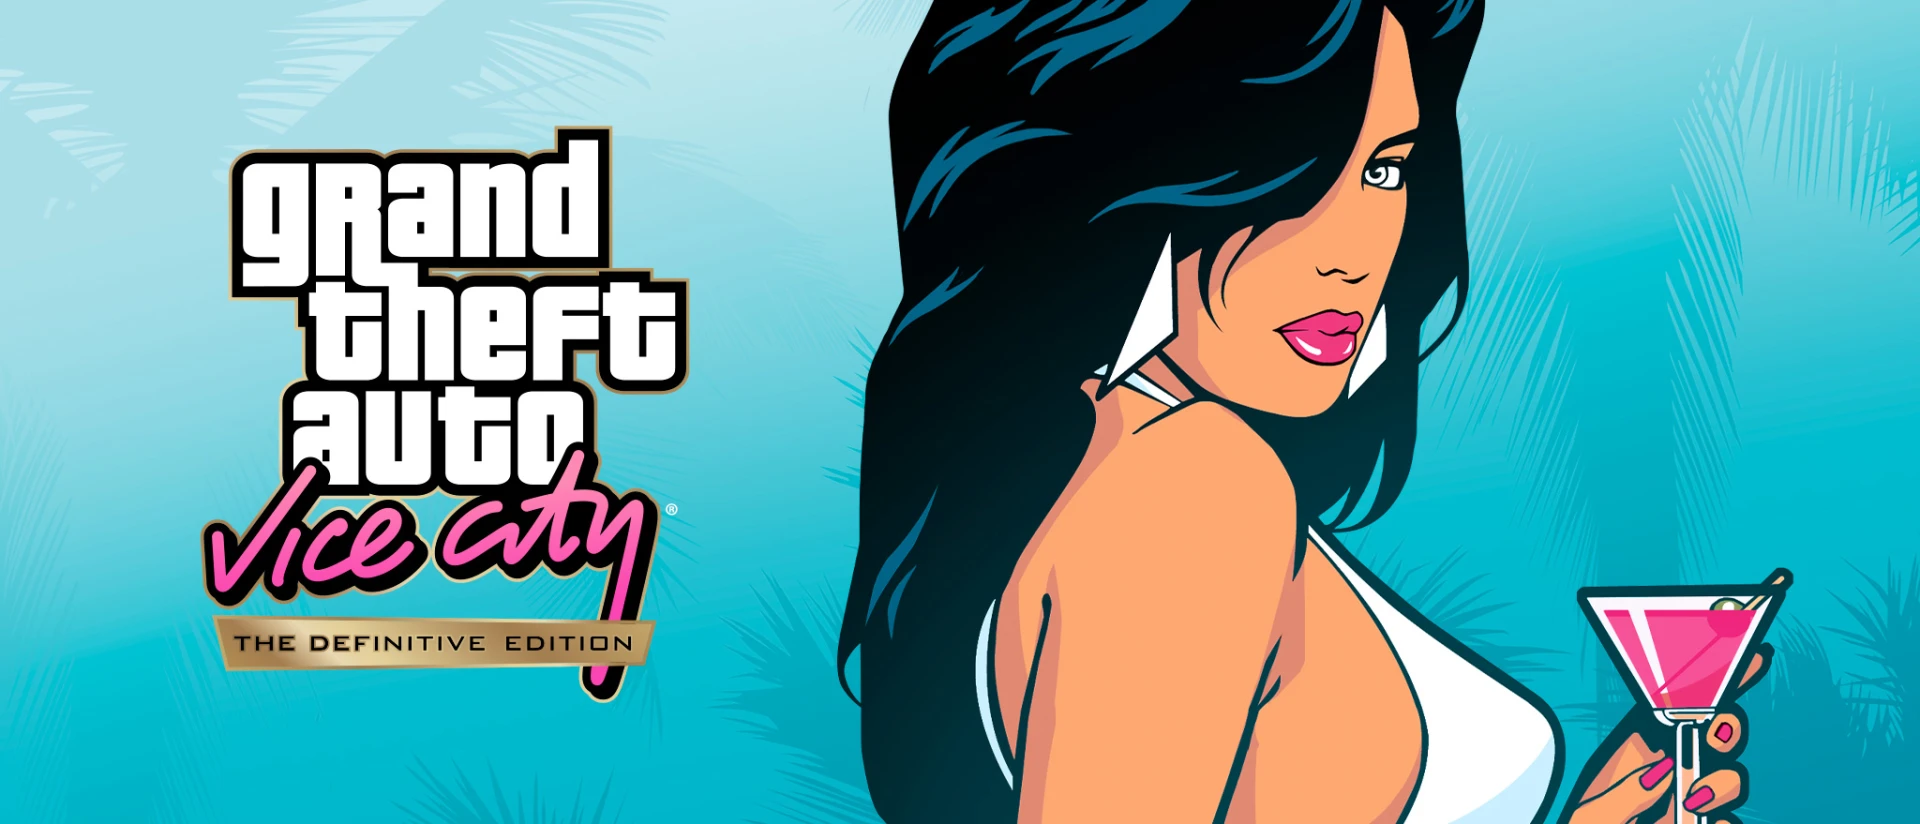  Grand Theft Auto: Vice City - The Definitive Edition  